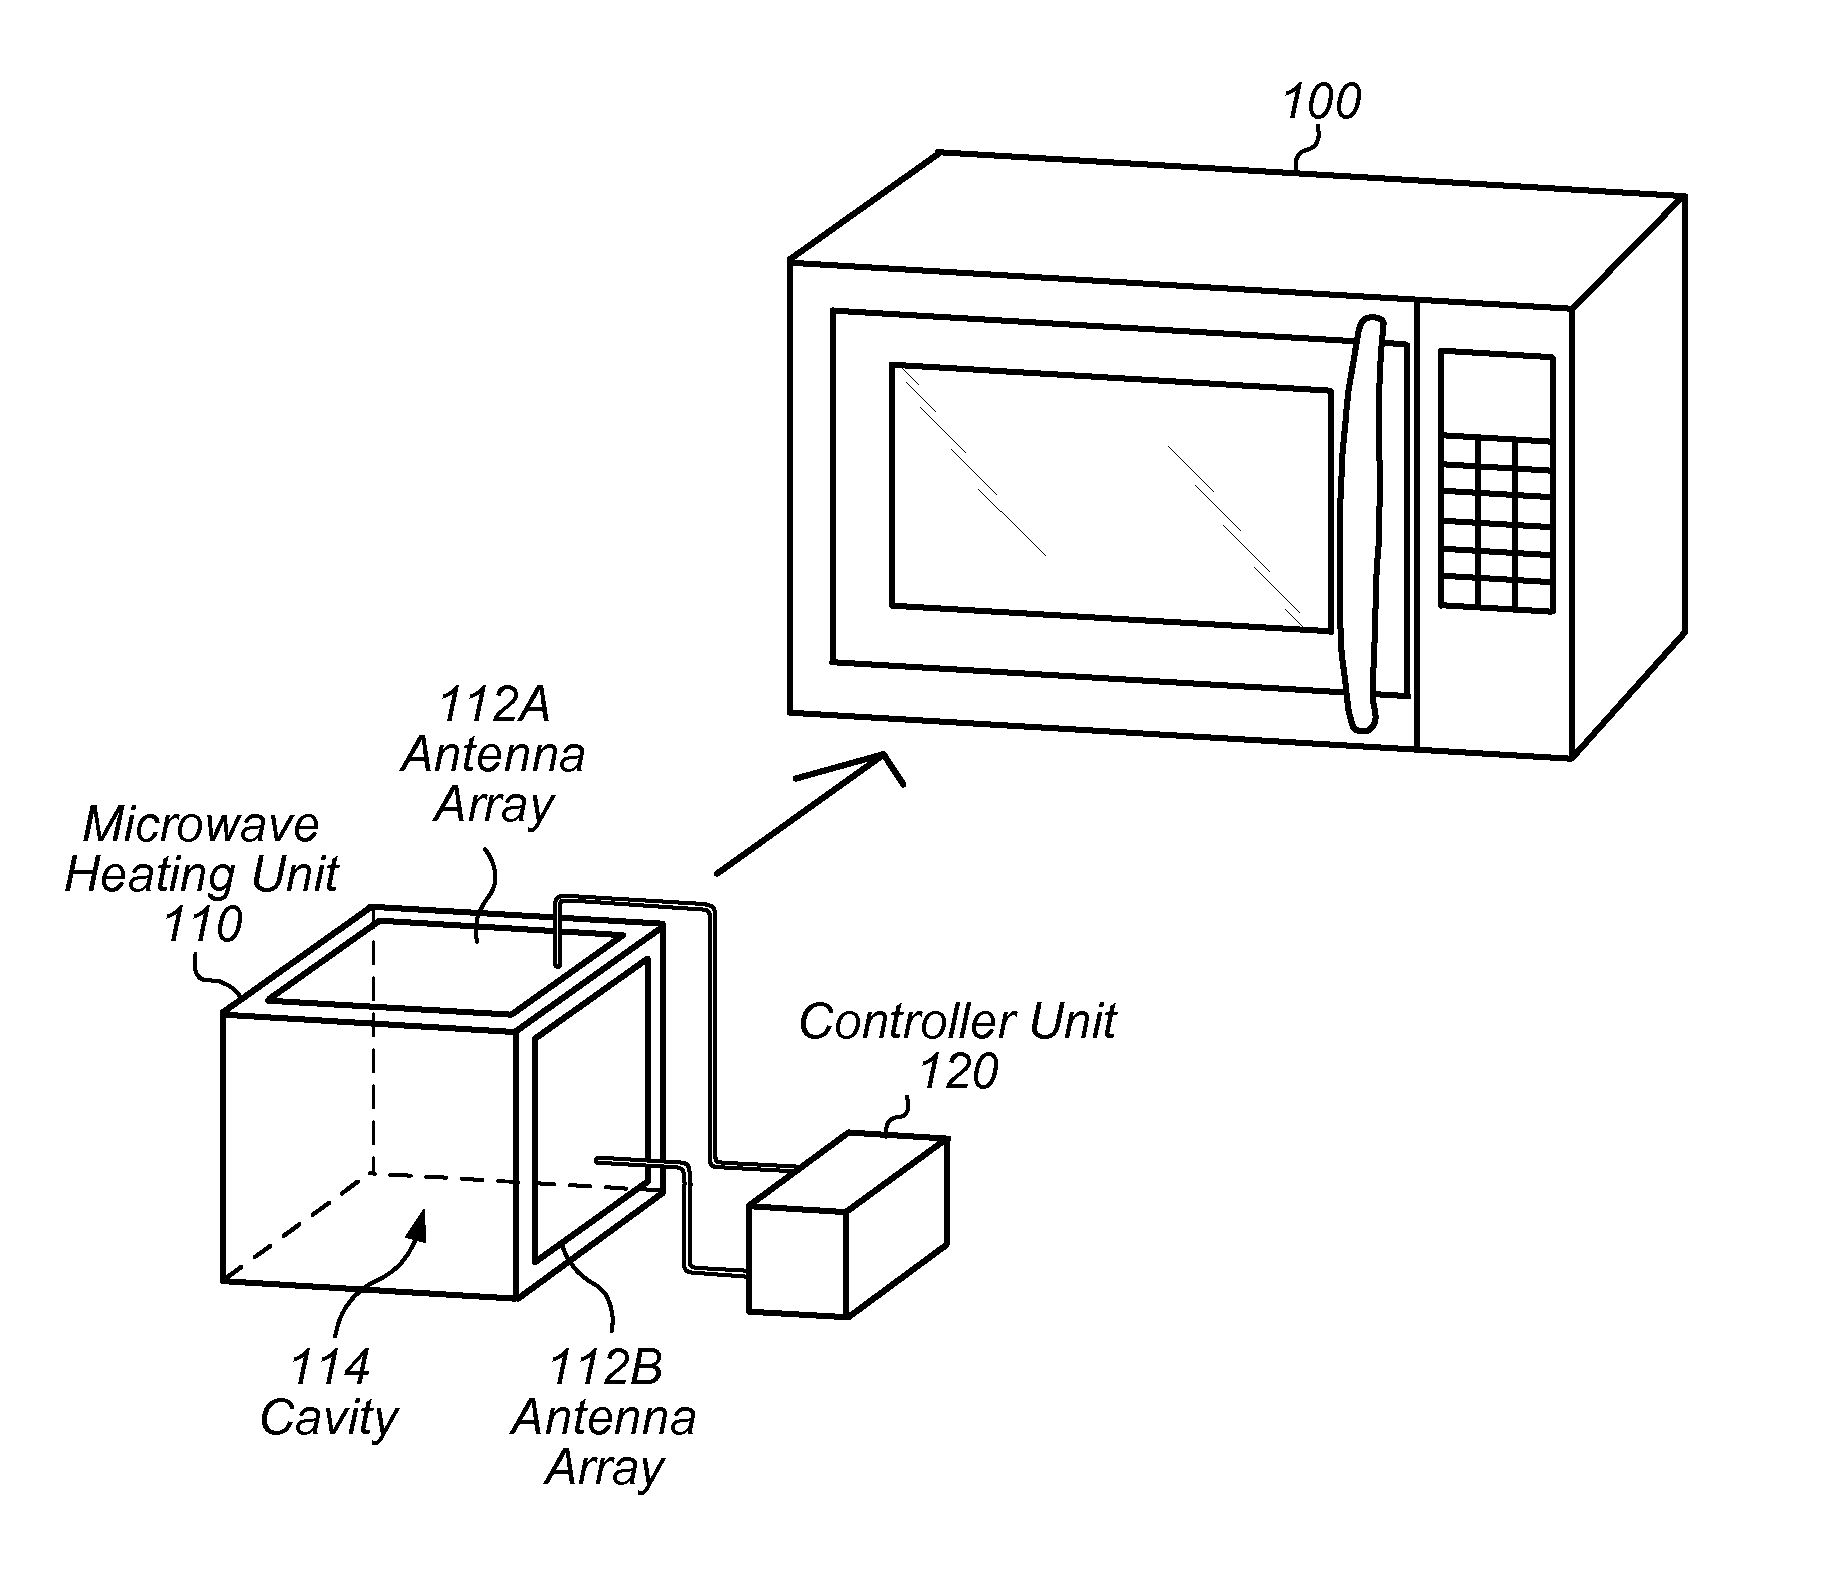 Microwave oven with antenna array